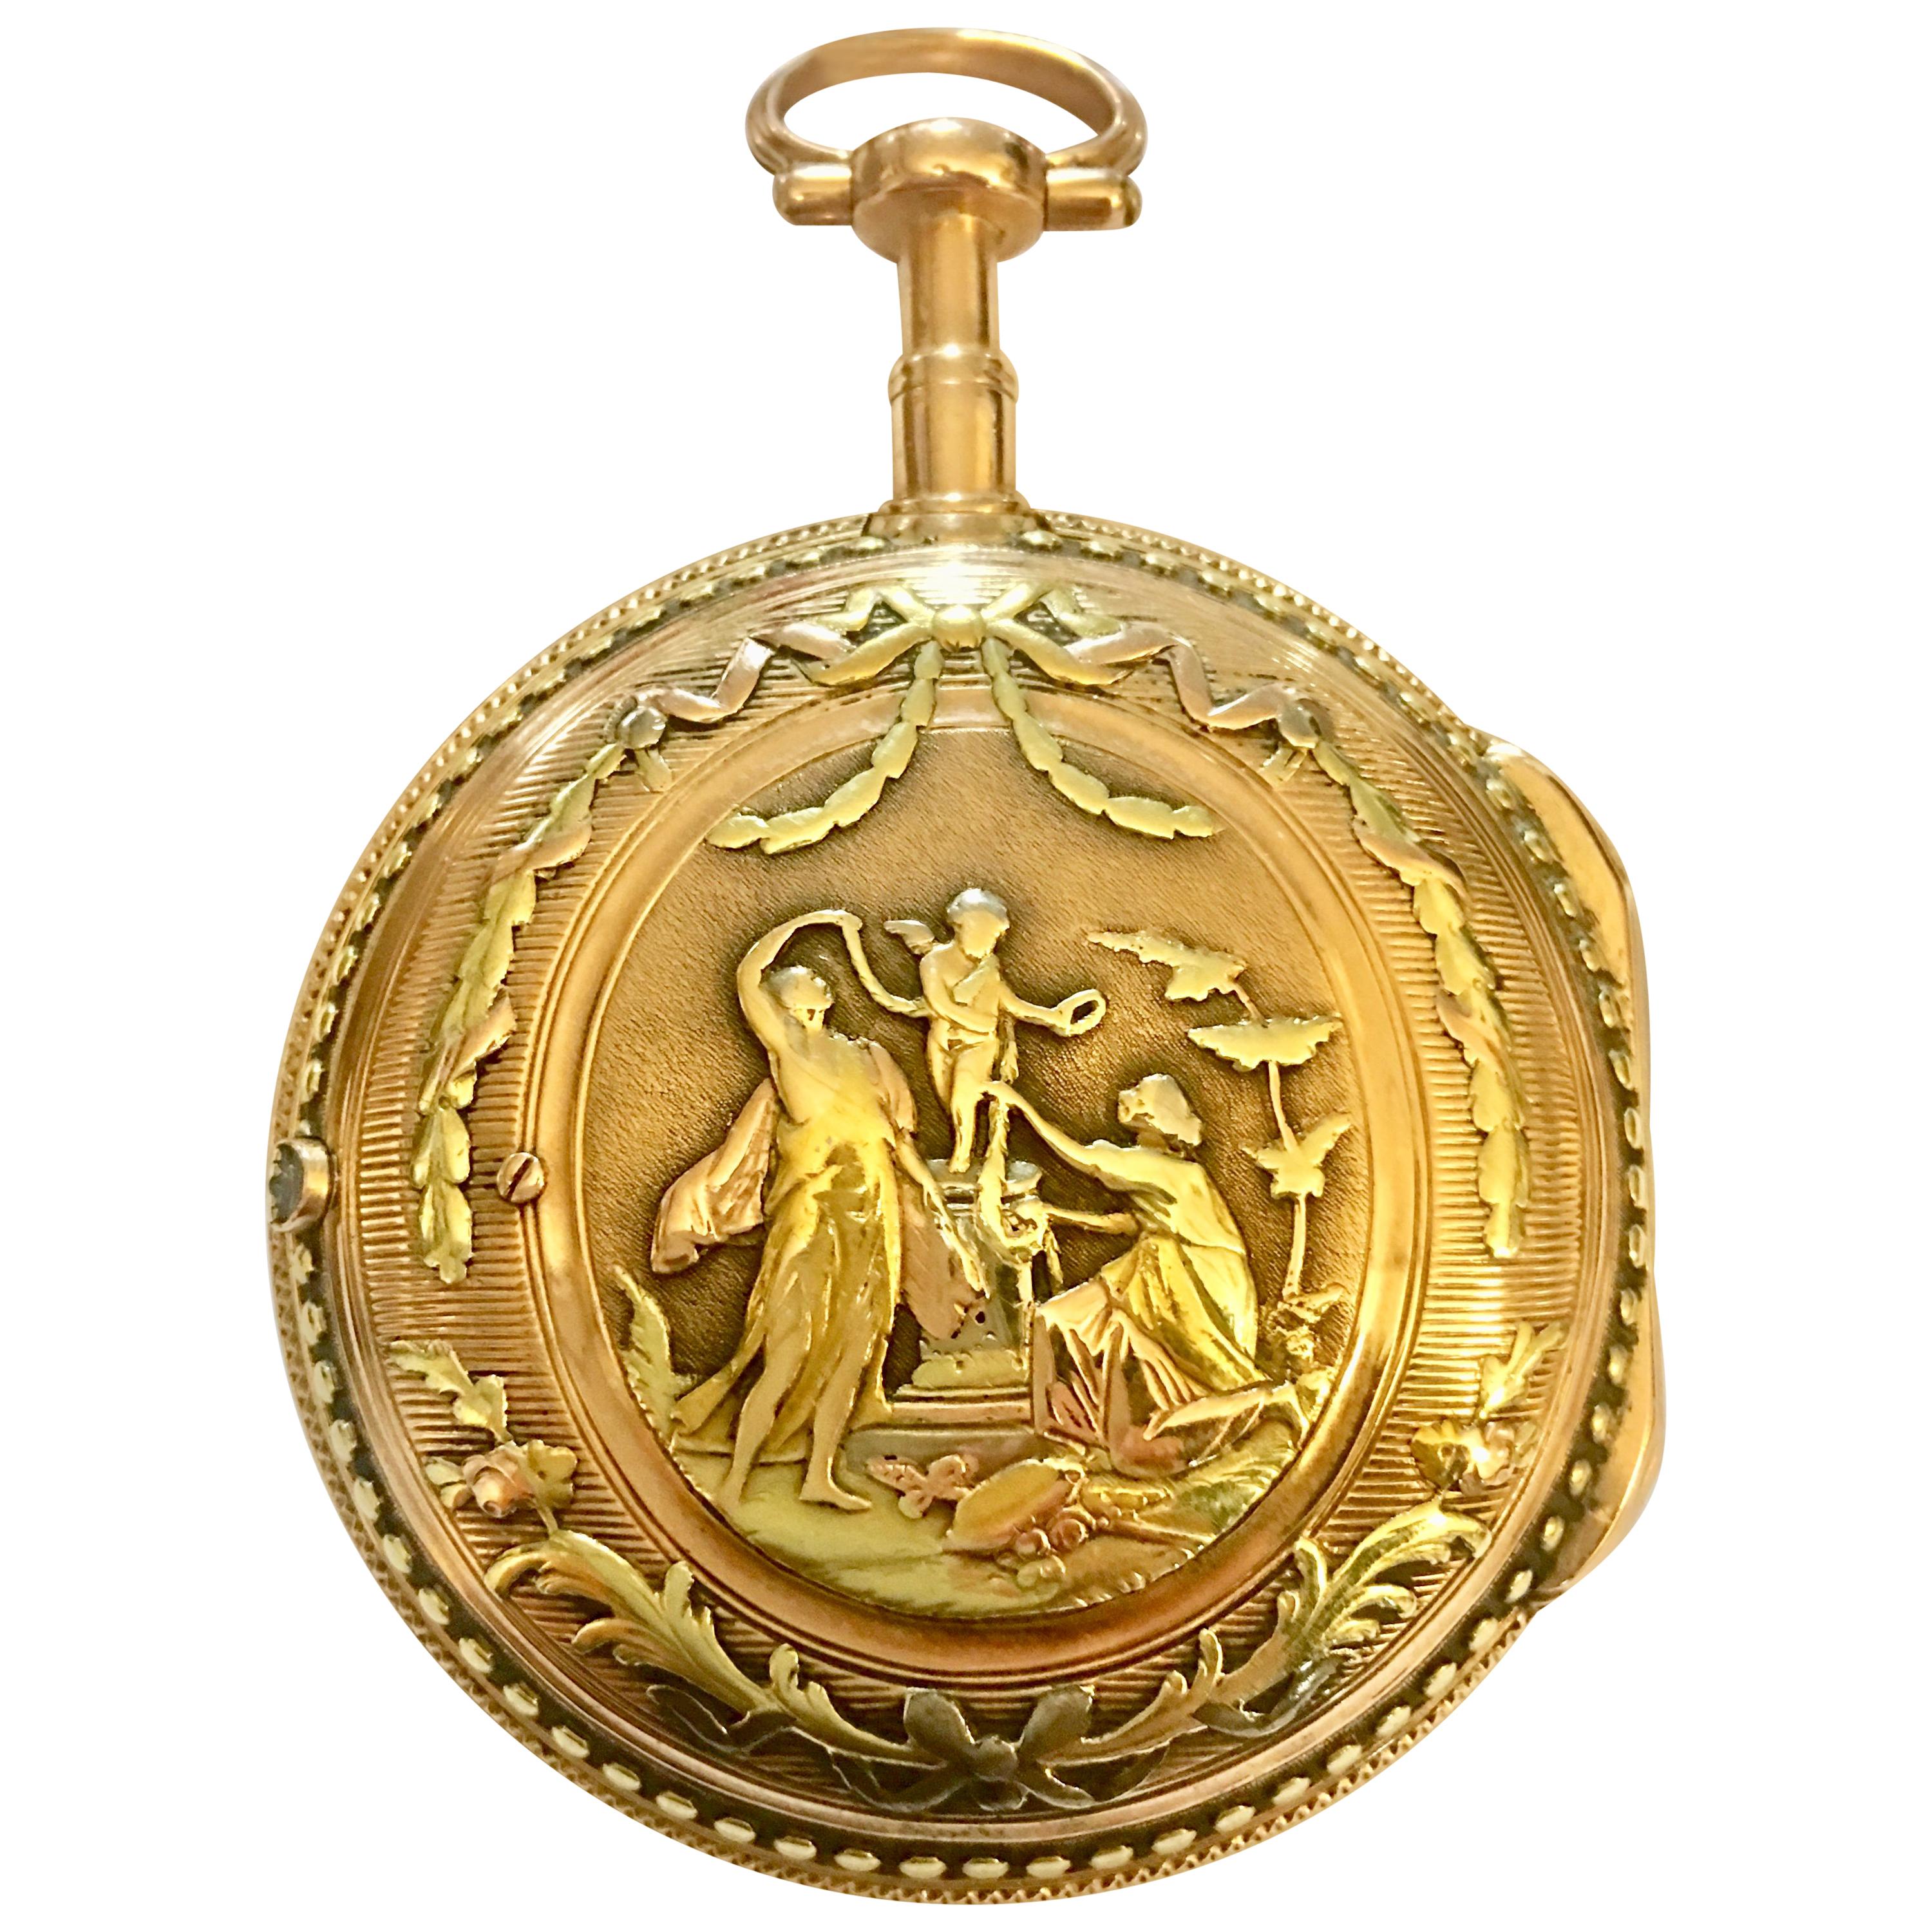 Rare & Early Verge Fusee 18 Karat Tri-Color Gold Pocket Watch by Mallet A Paris For Sale